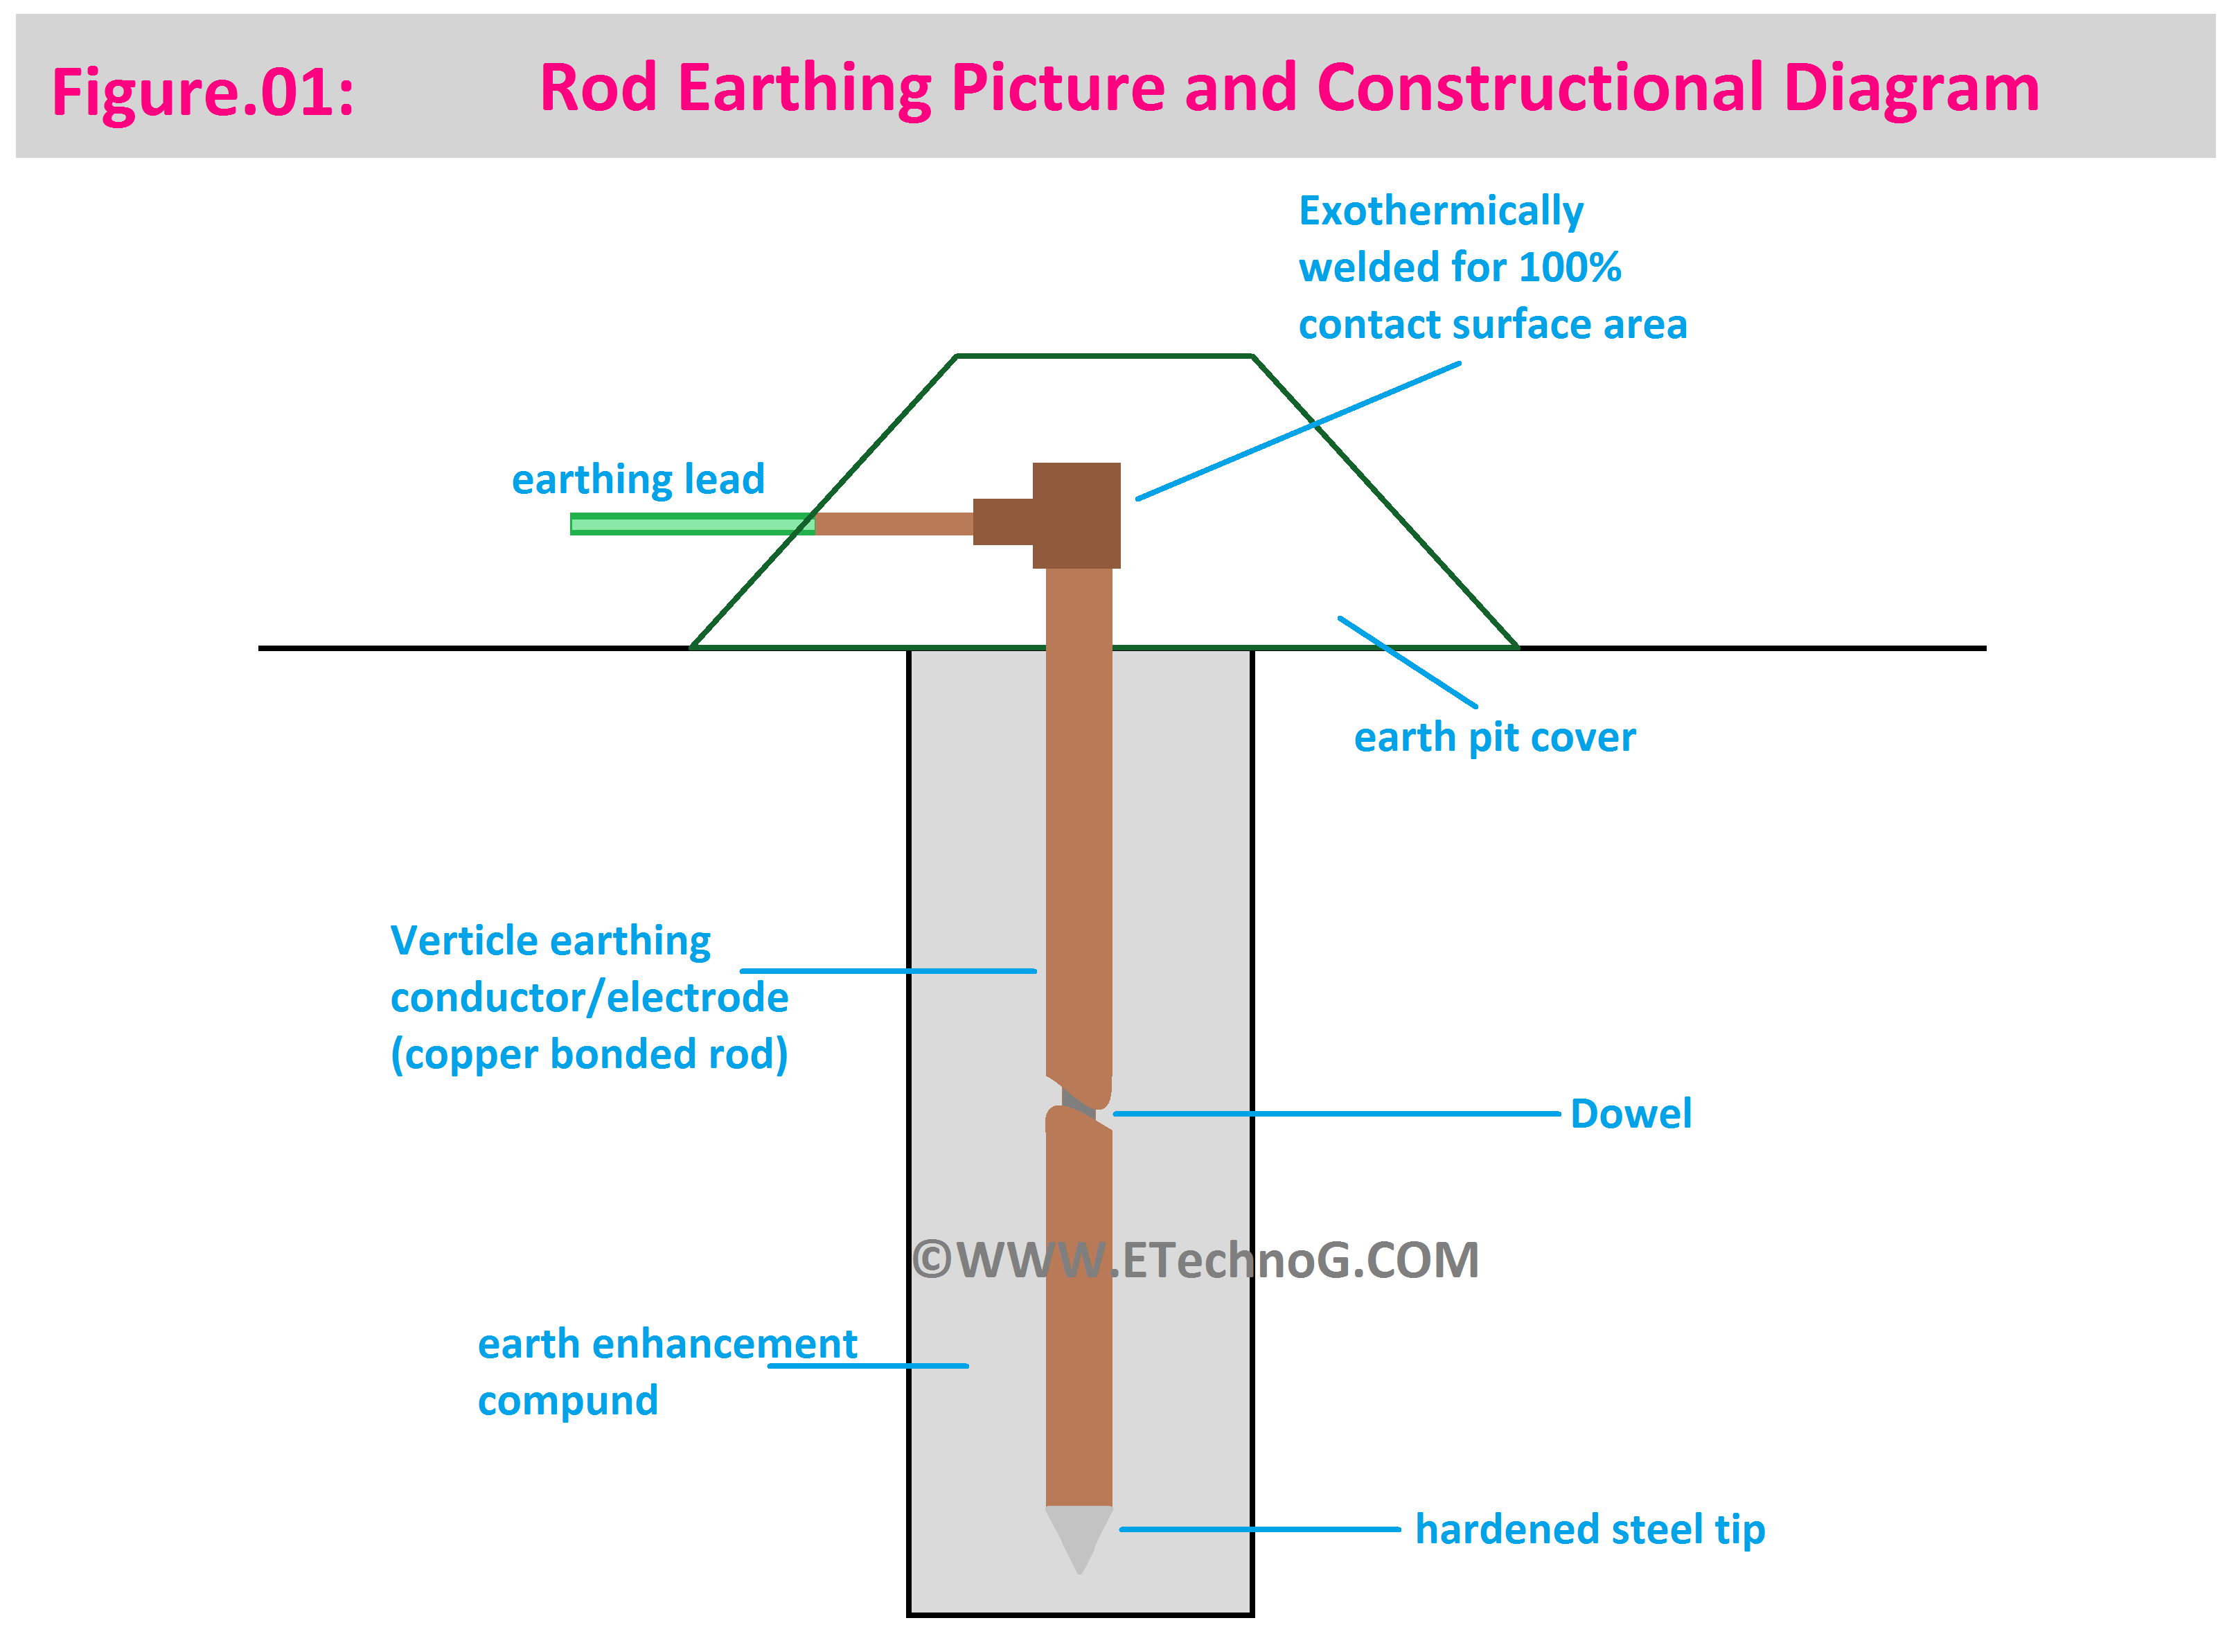 Rod Earthing Picture and Constructional Diagram